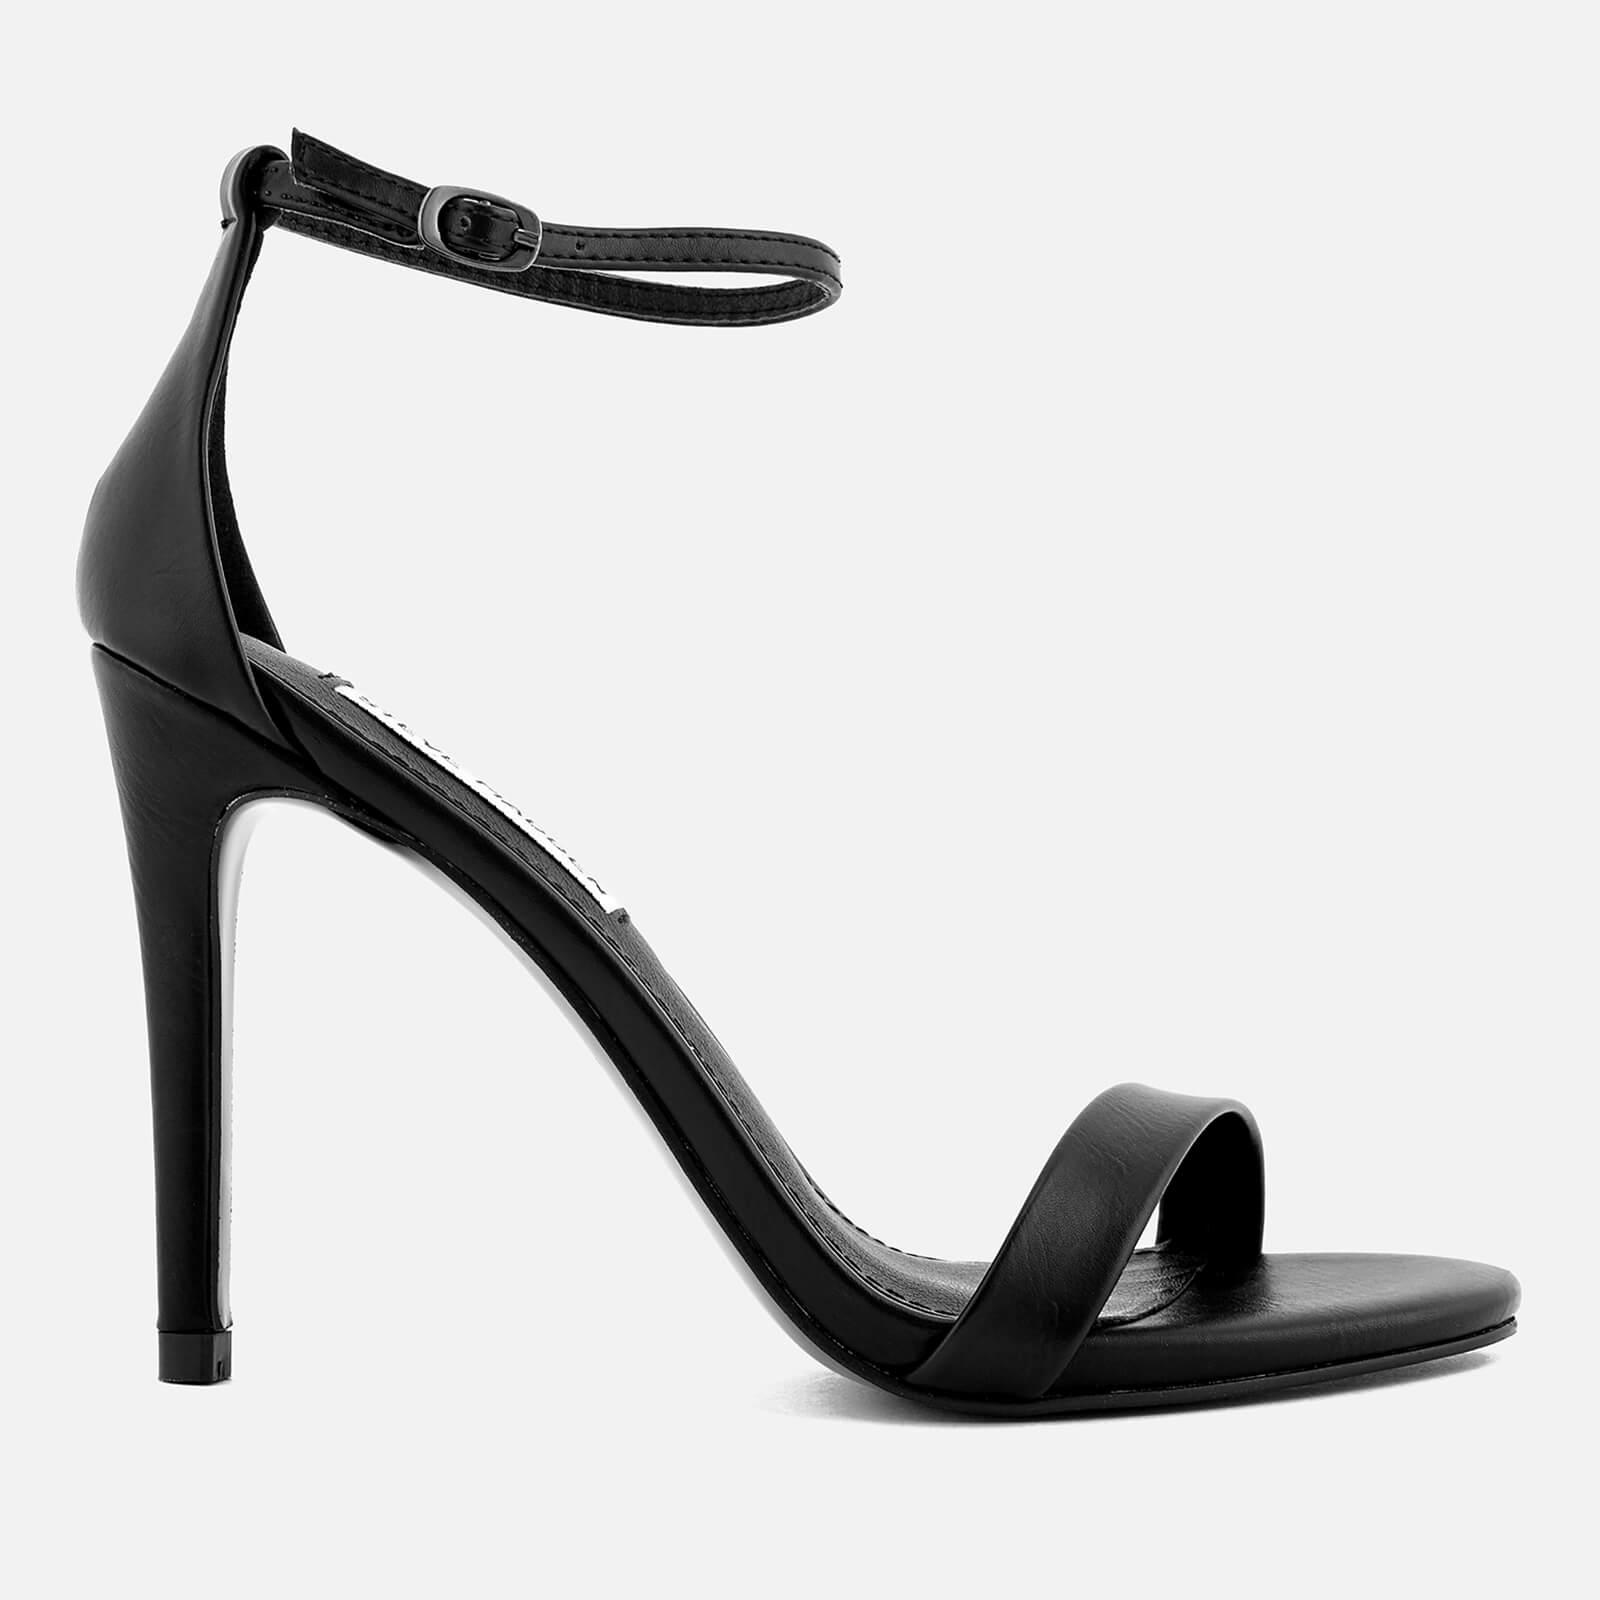 steve madden barely there heels